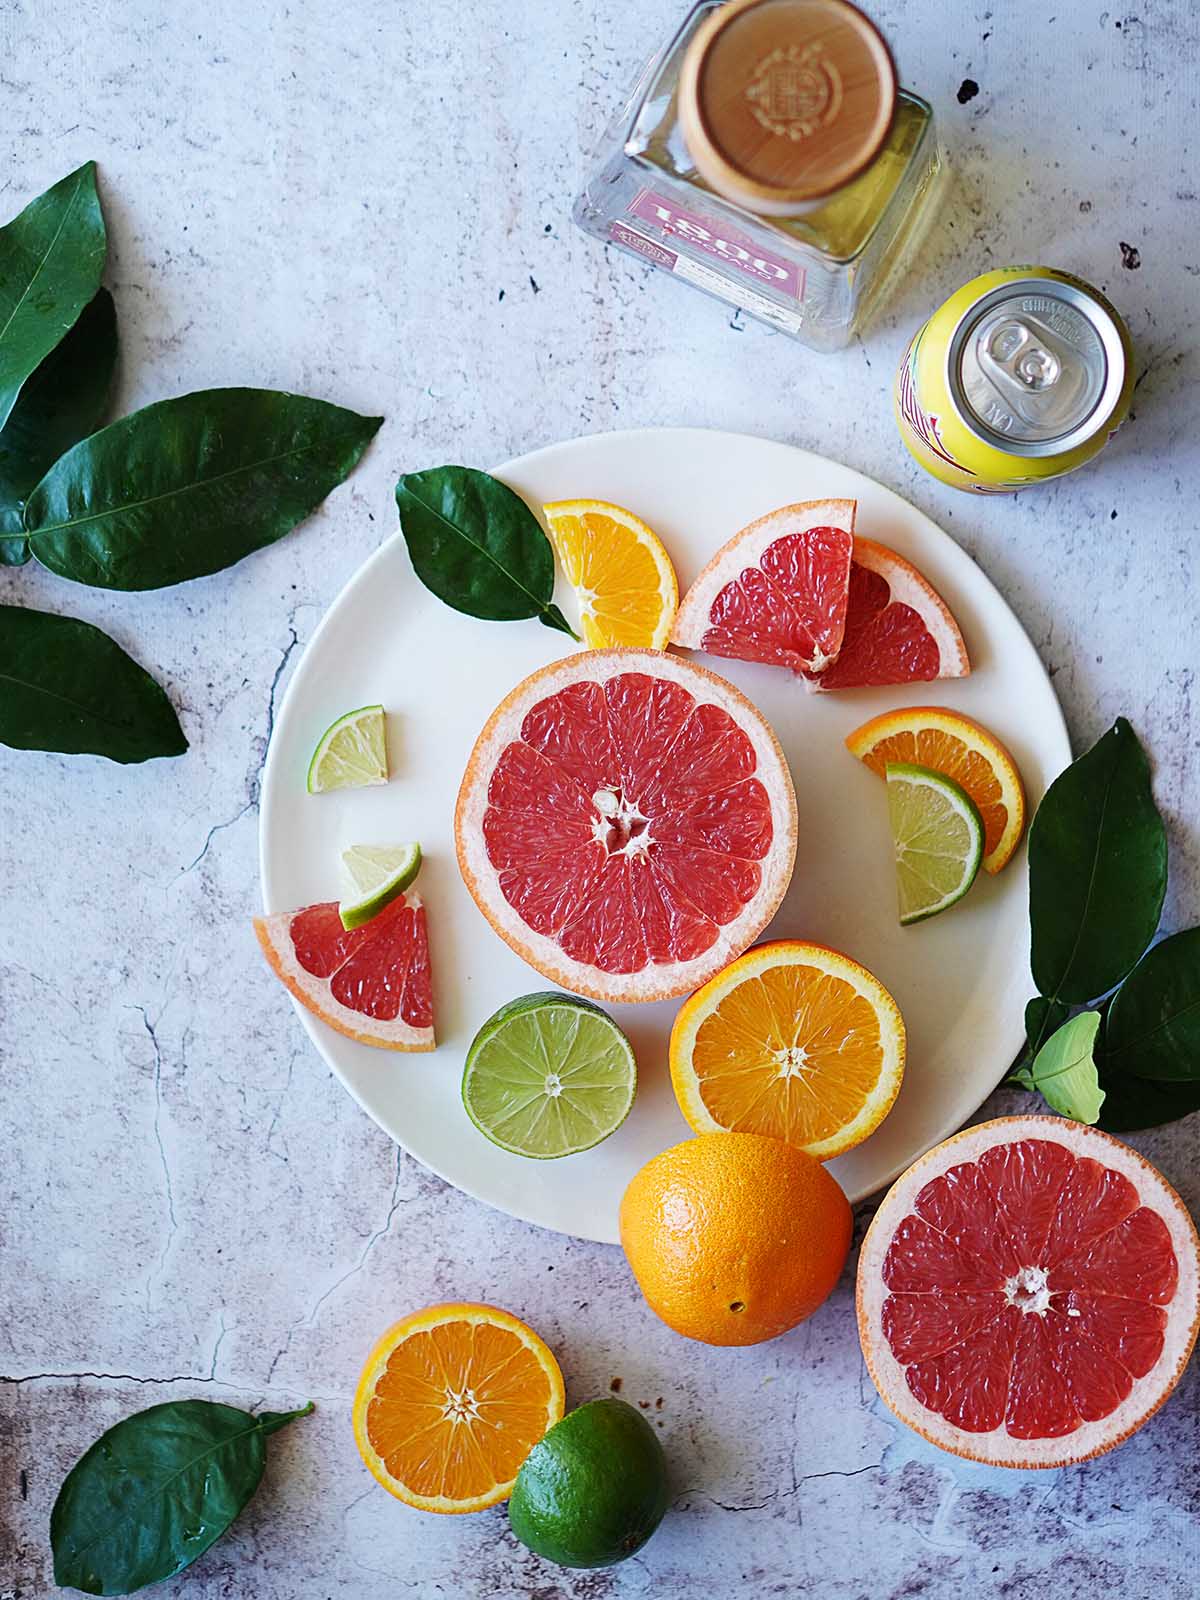 Oranges, grapefruits and lime cut into slices placed on a white plate.